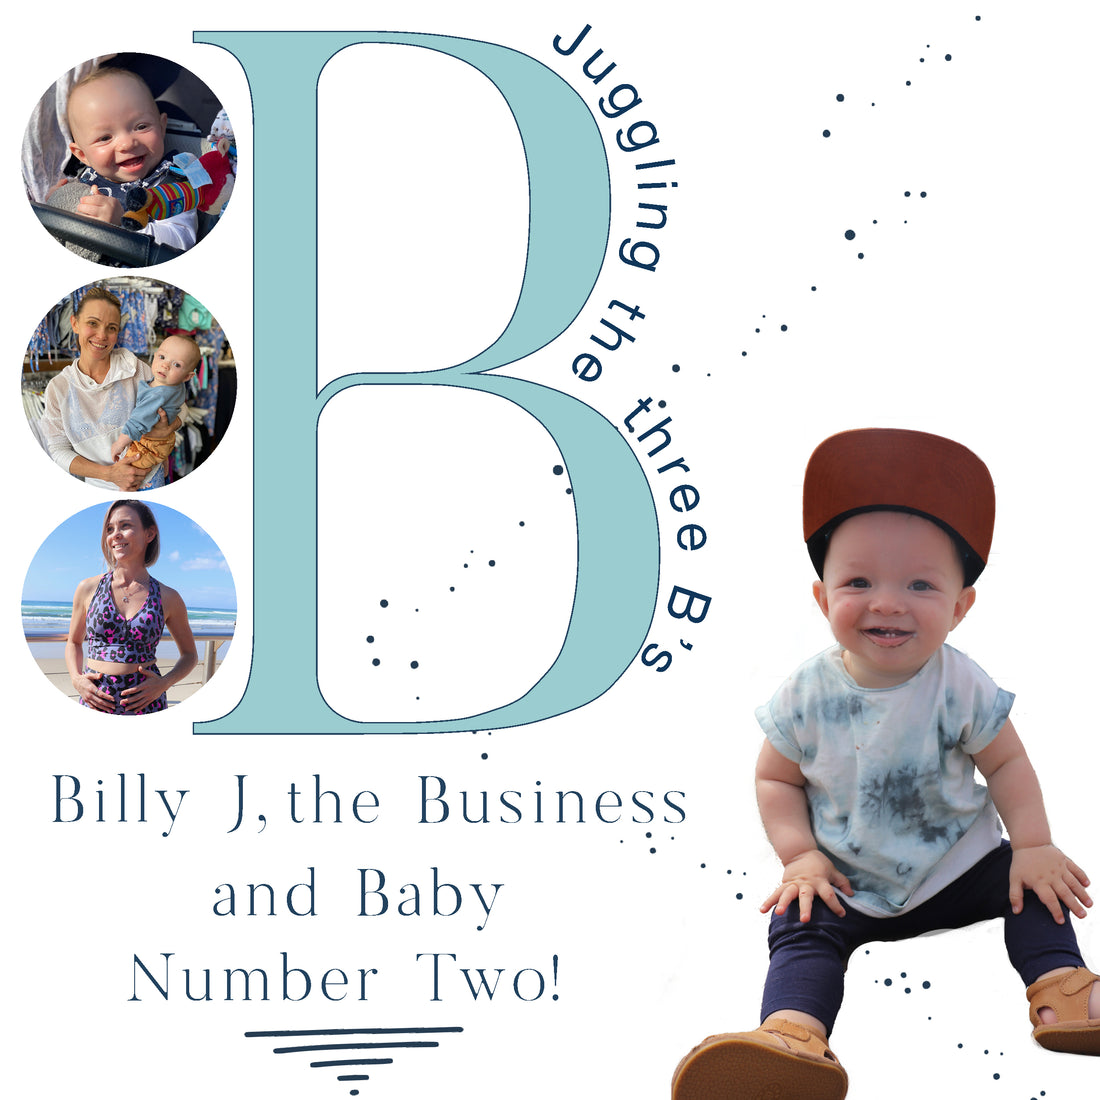 Juggling The Three B’s: Billy J, the Business and Baby Number Two!